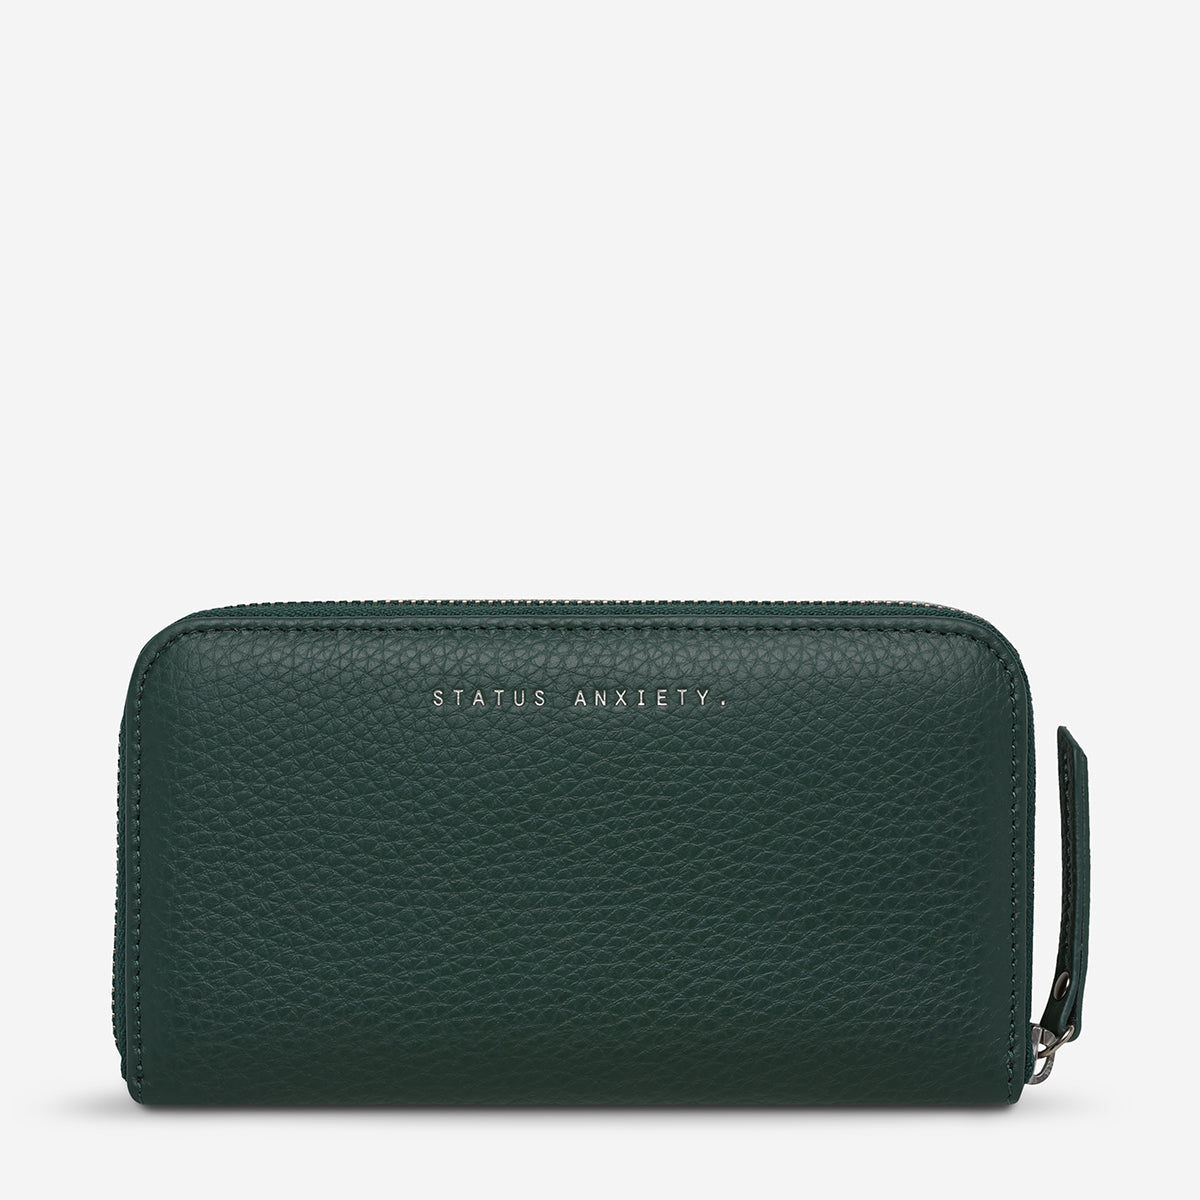 Status Anxiety - Yet To Come Wallet - Teal